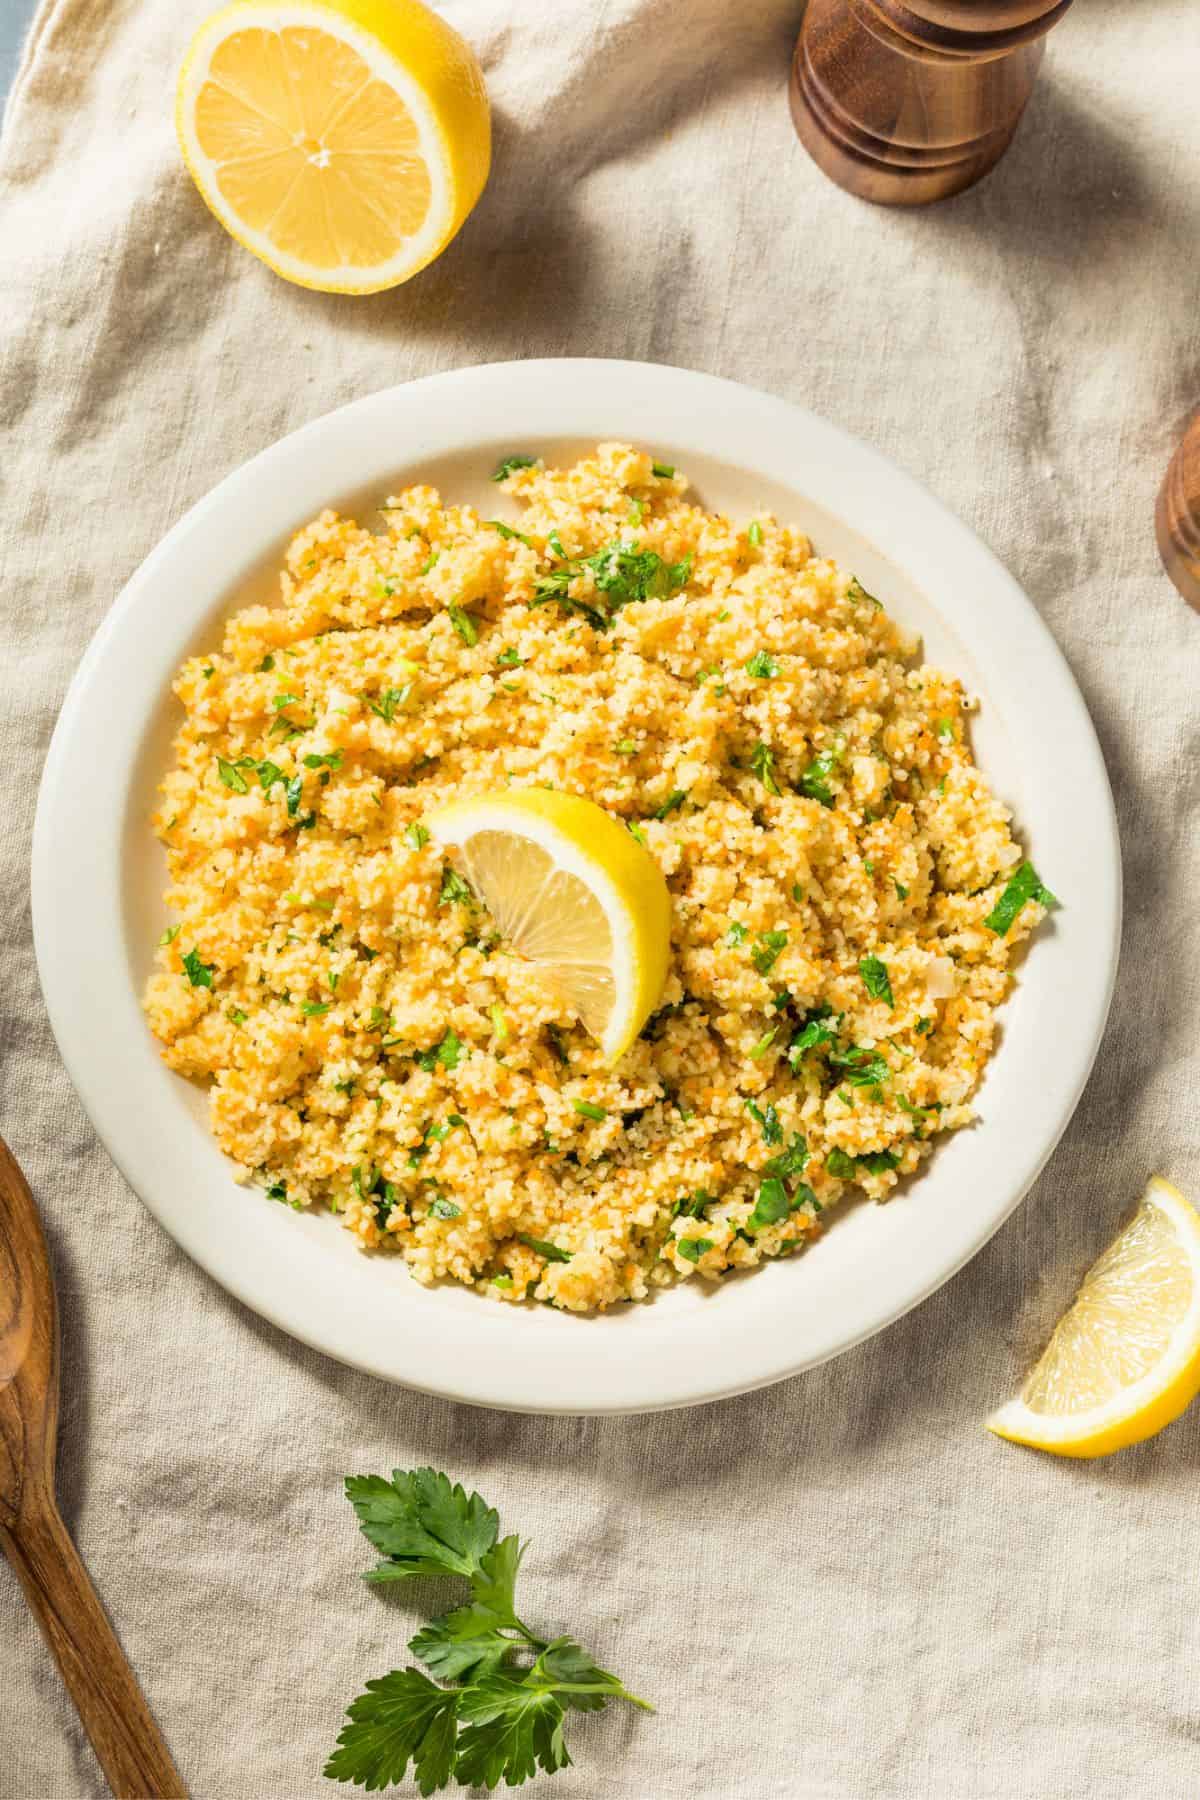 Homemade Healthy Butter and Herb Couscous with Lemon.